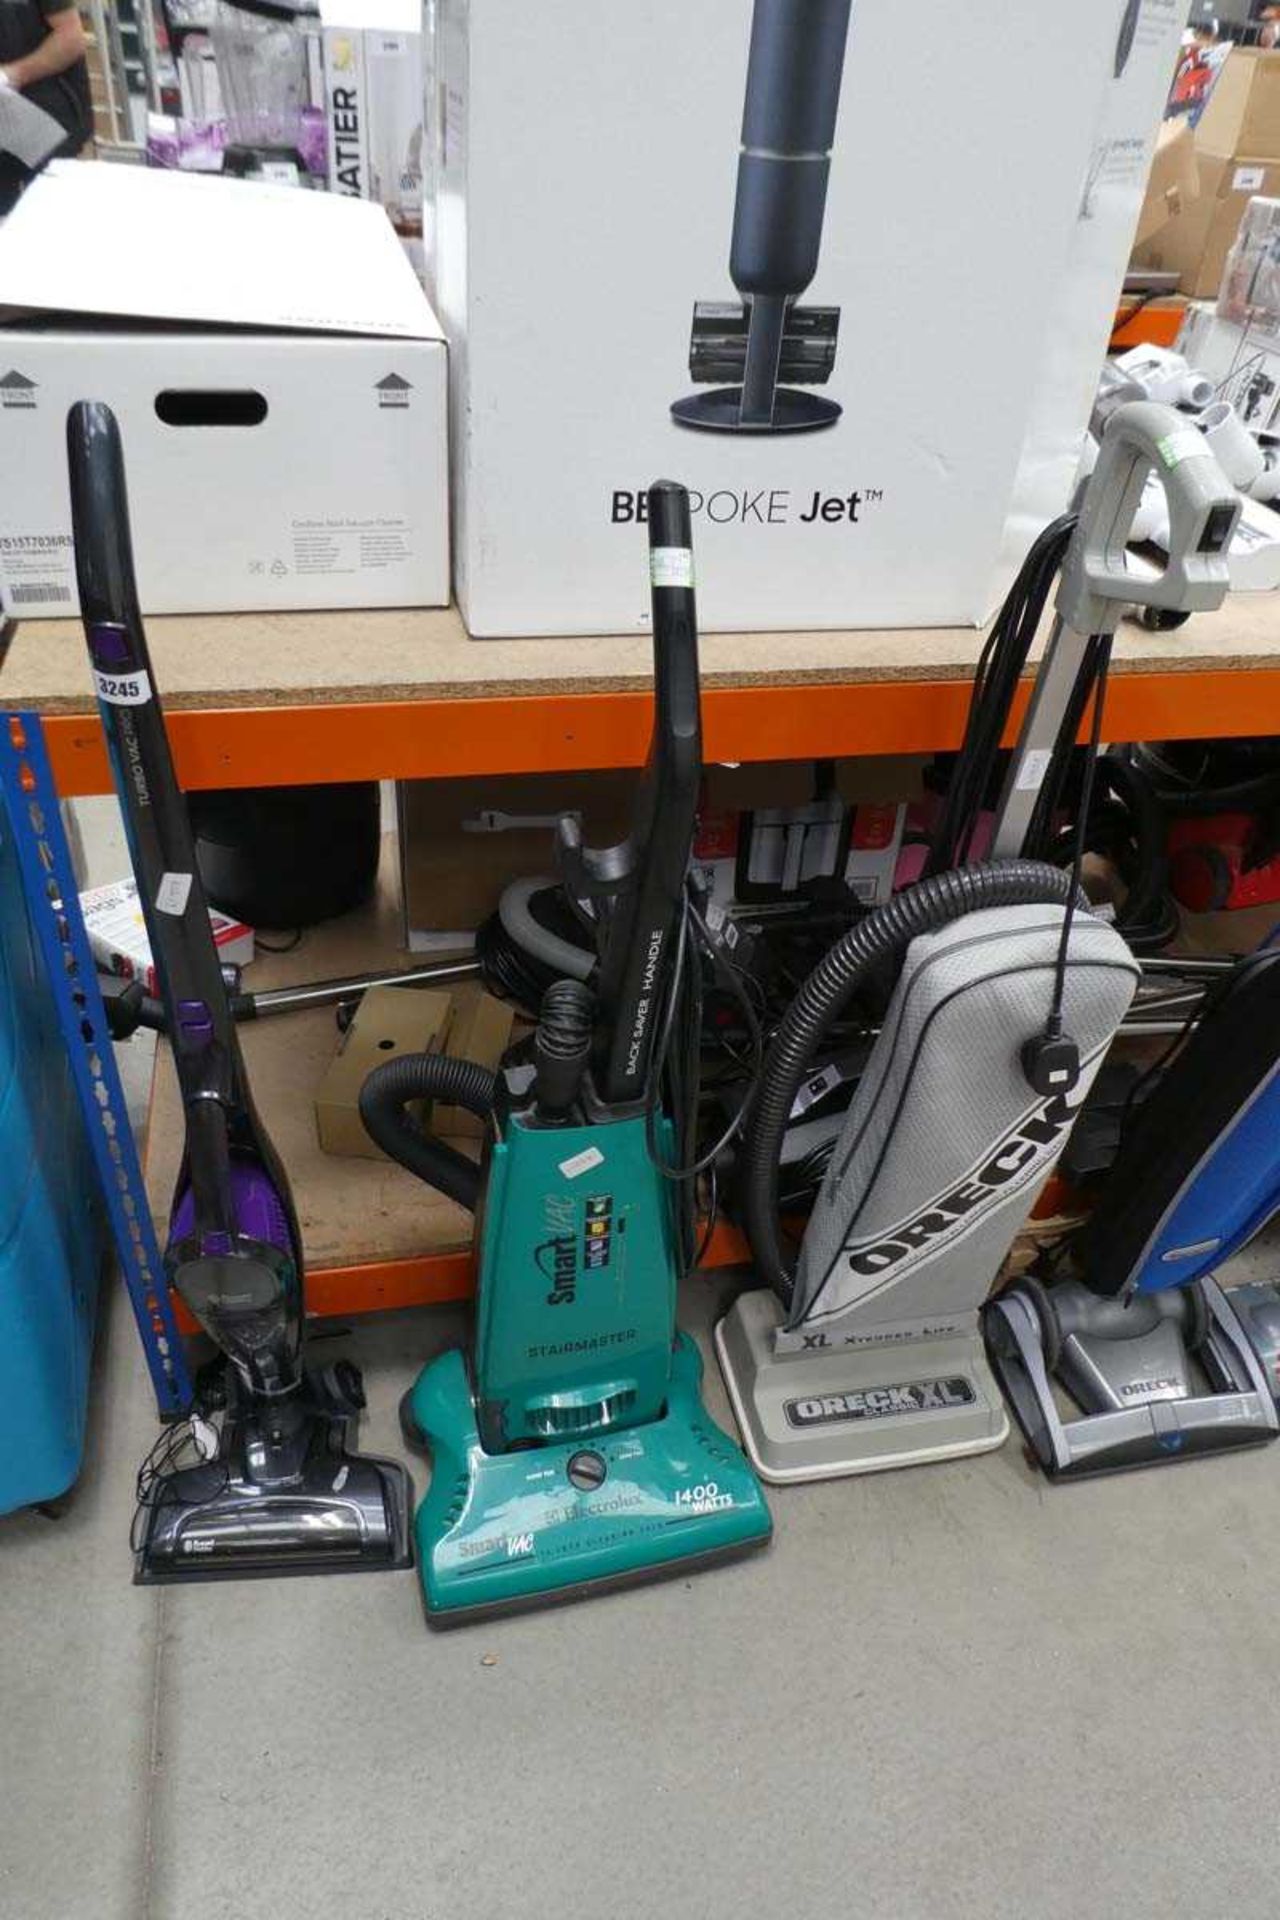 Upright Turbo vac Pro with charger plus a smart vac and a Oreckxl Classic vacuum